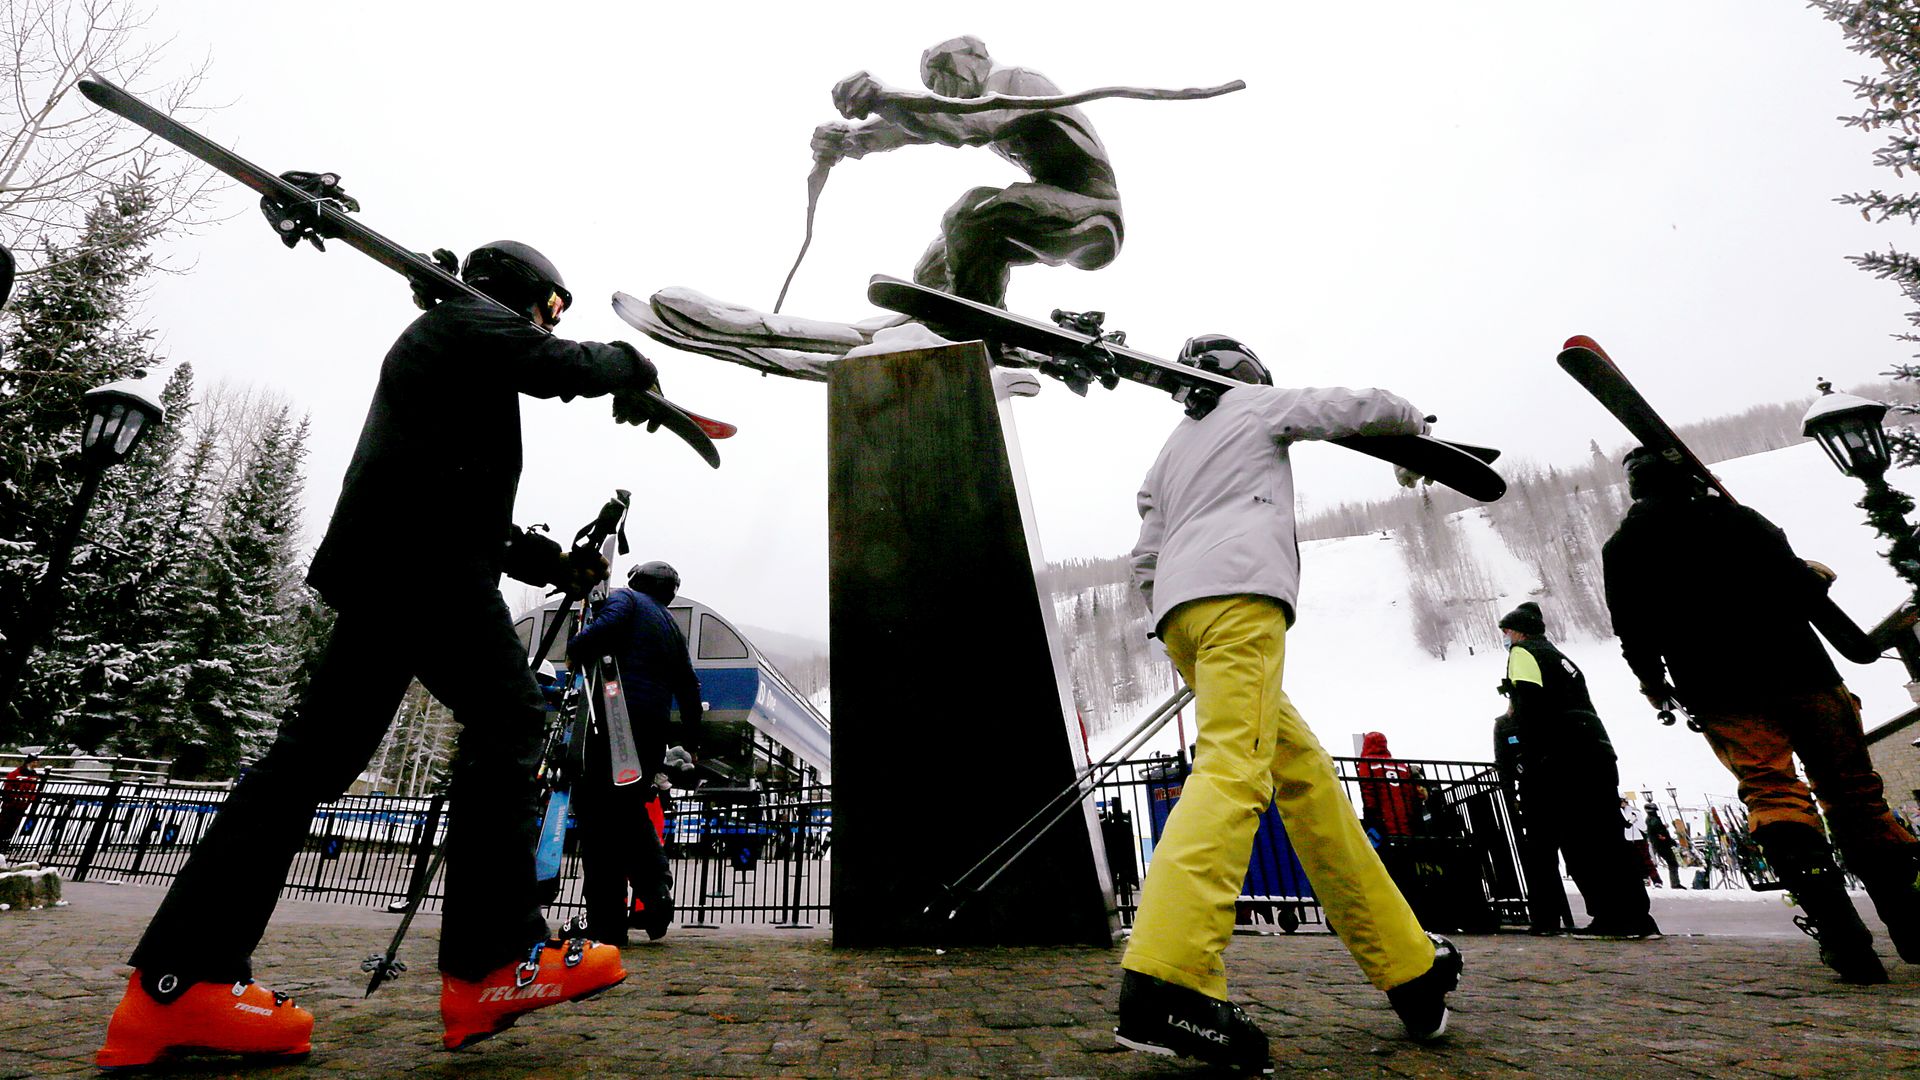 Skiers in Vail Village at the foot of Vail Mountain. Photo: Luis Sinco/Los Angeles Times via Getty Images